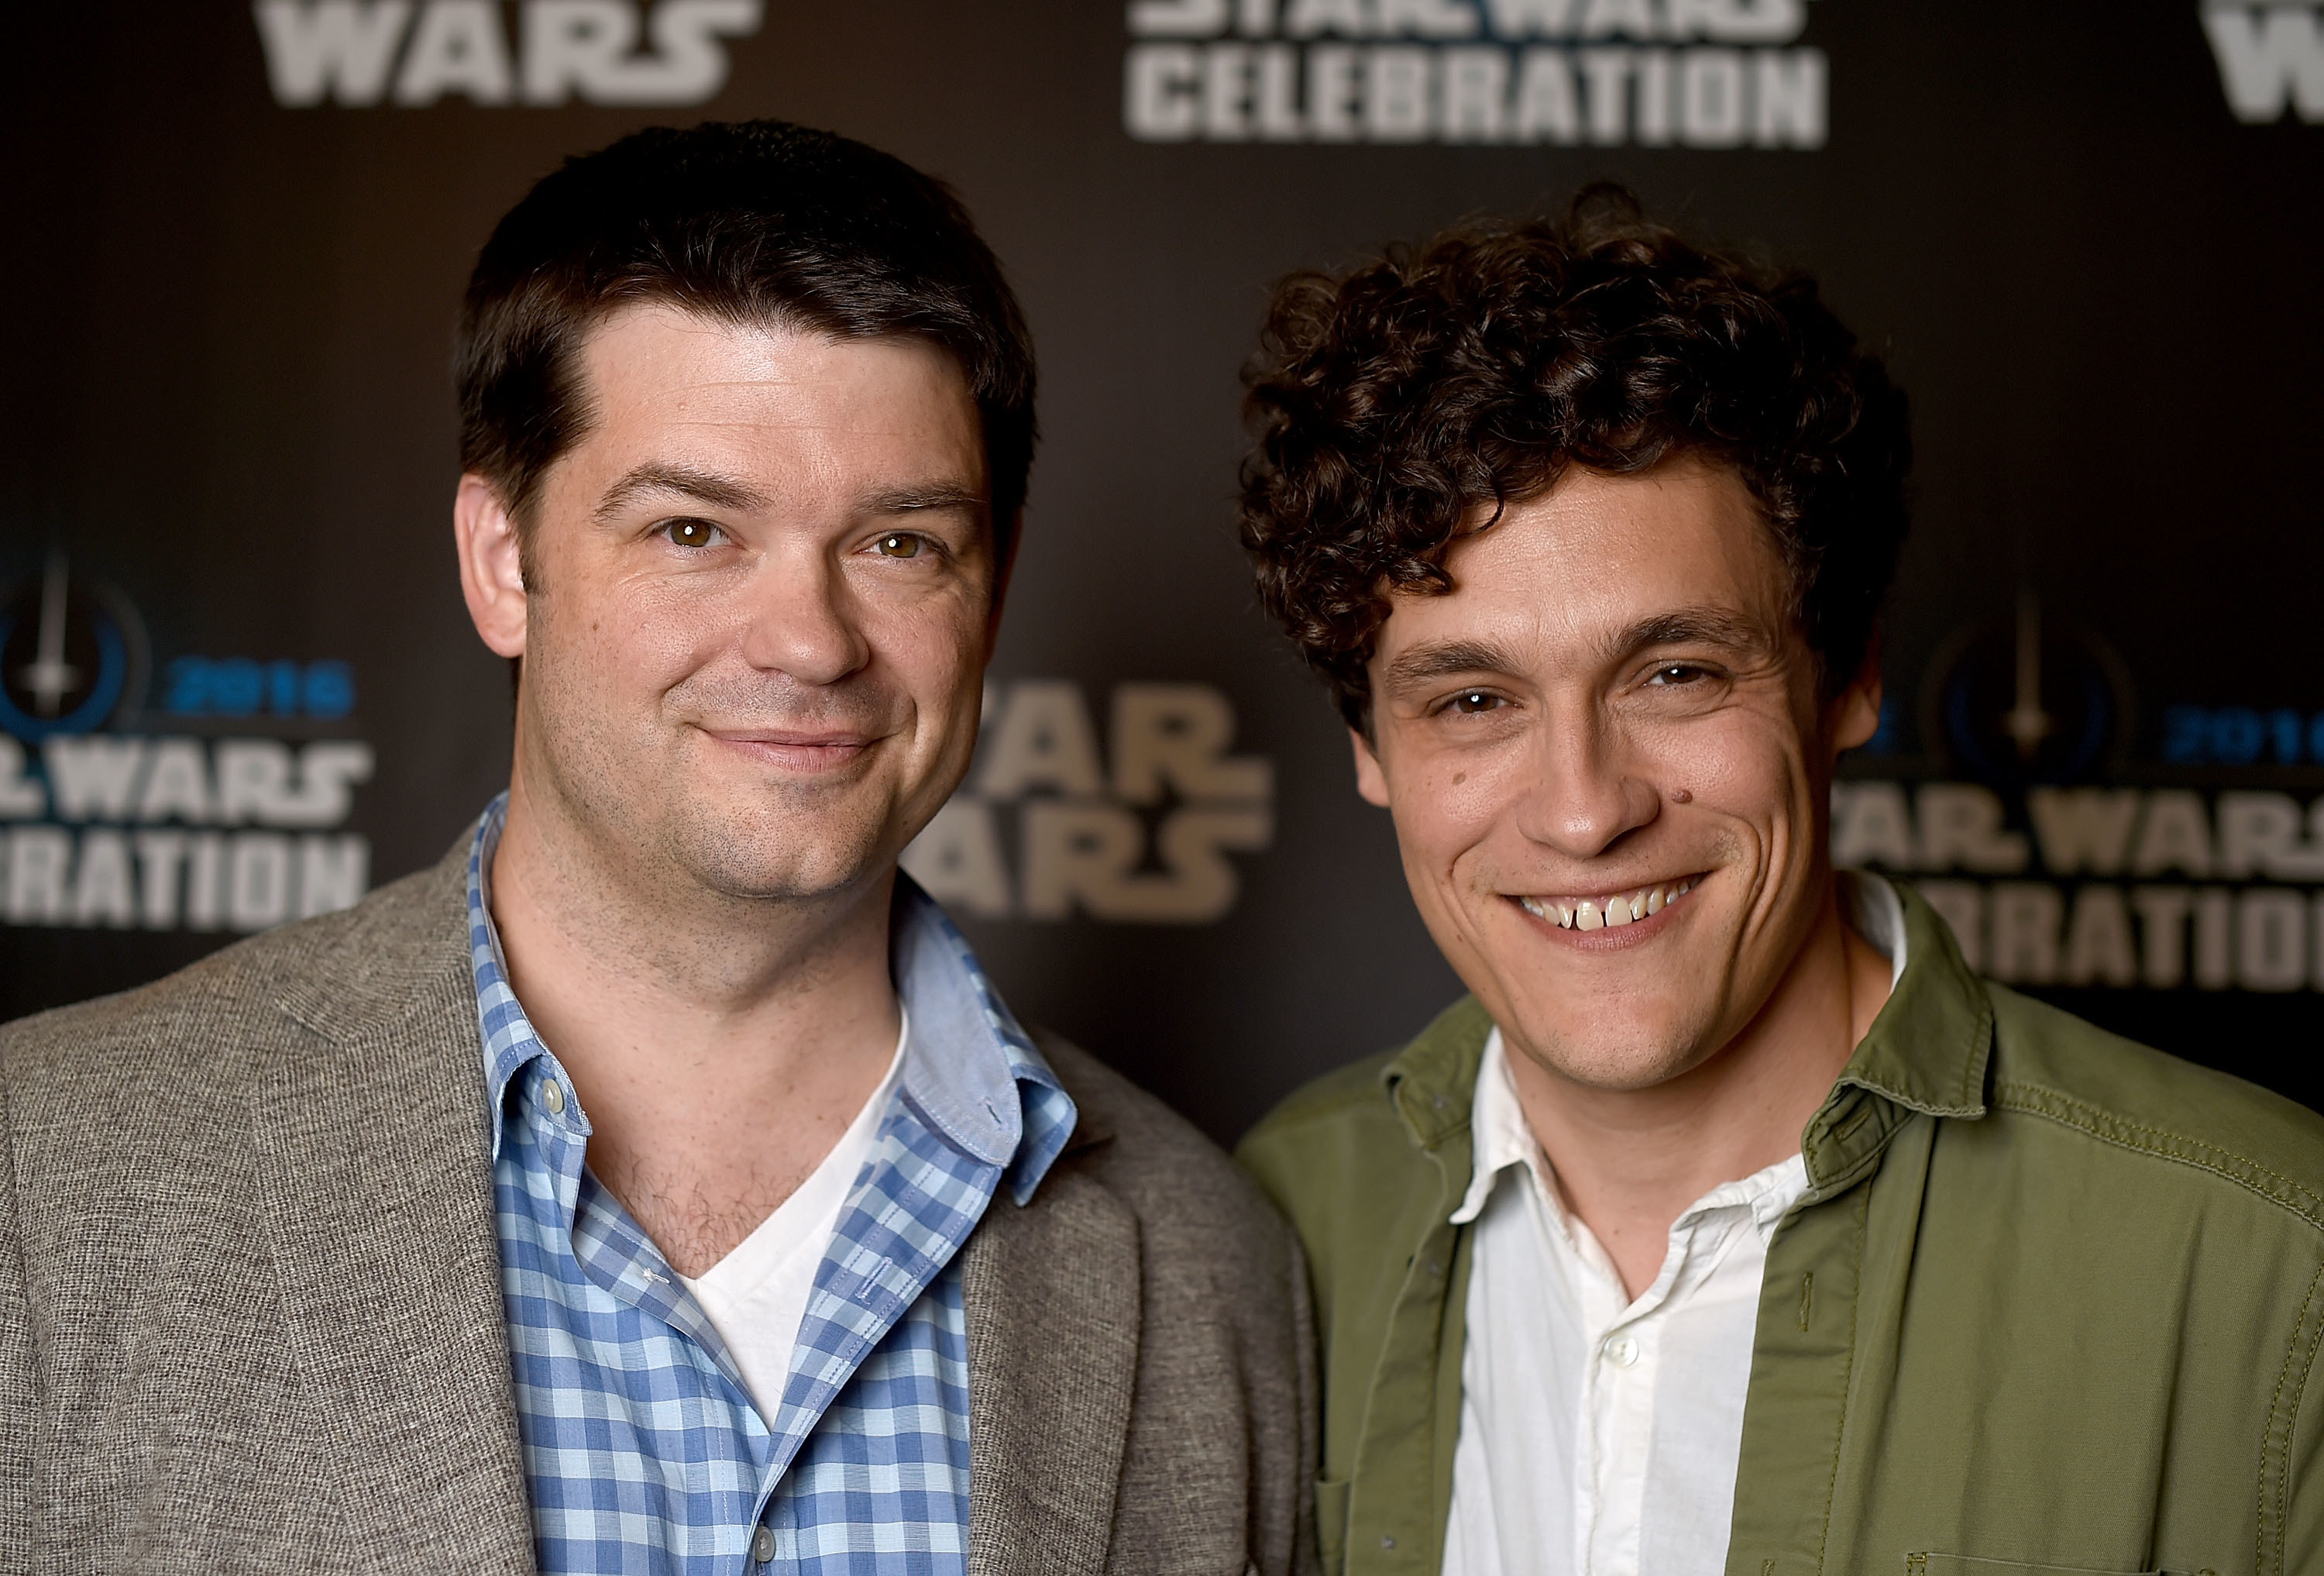 Chris Miller and Phil Lord attend the Star Wars Celebration 2016 in London